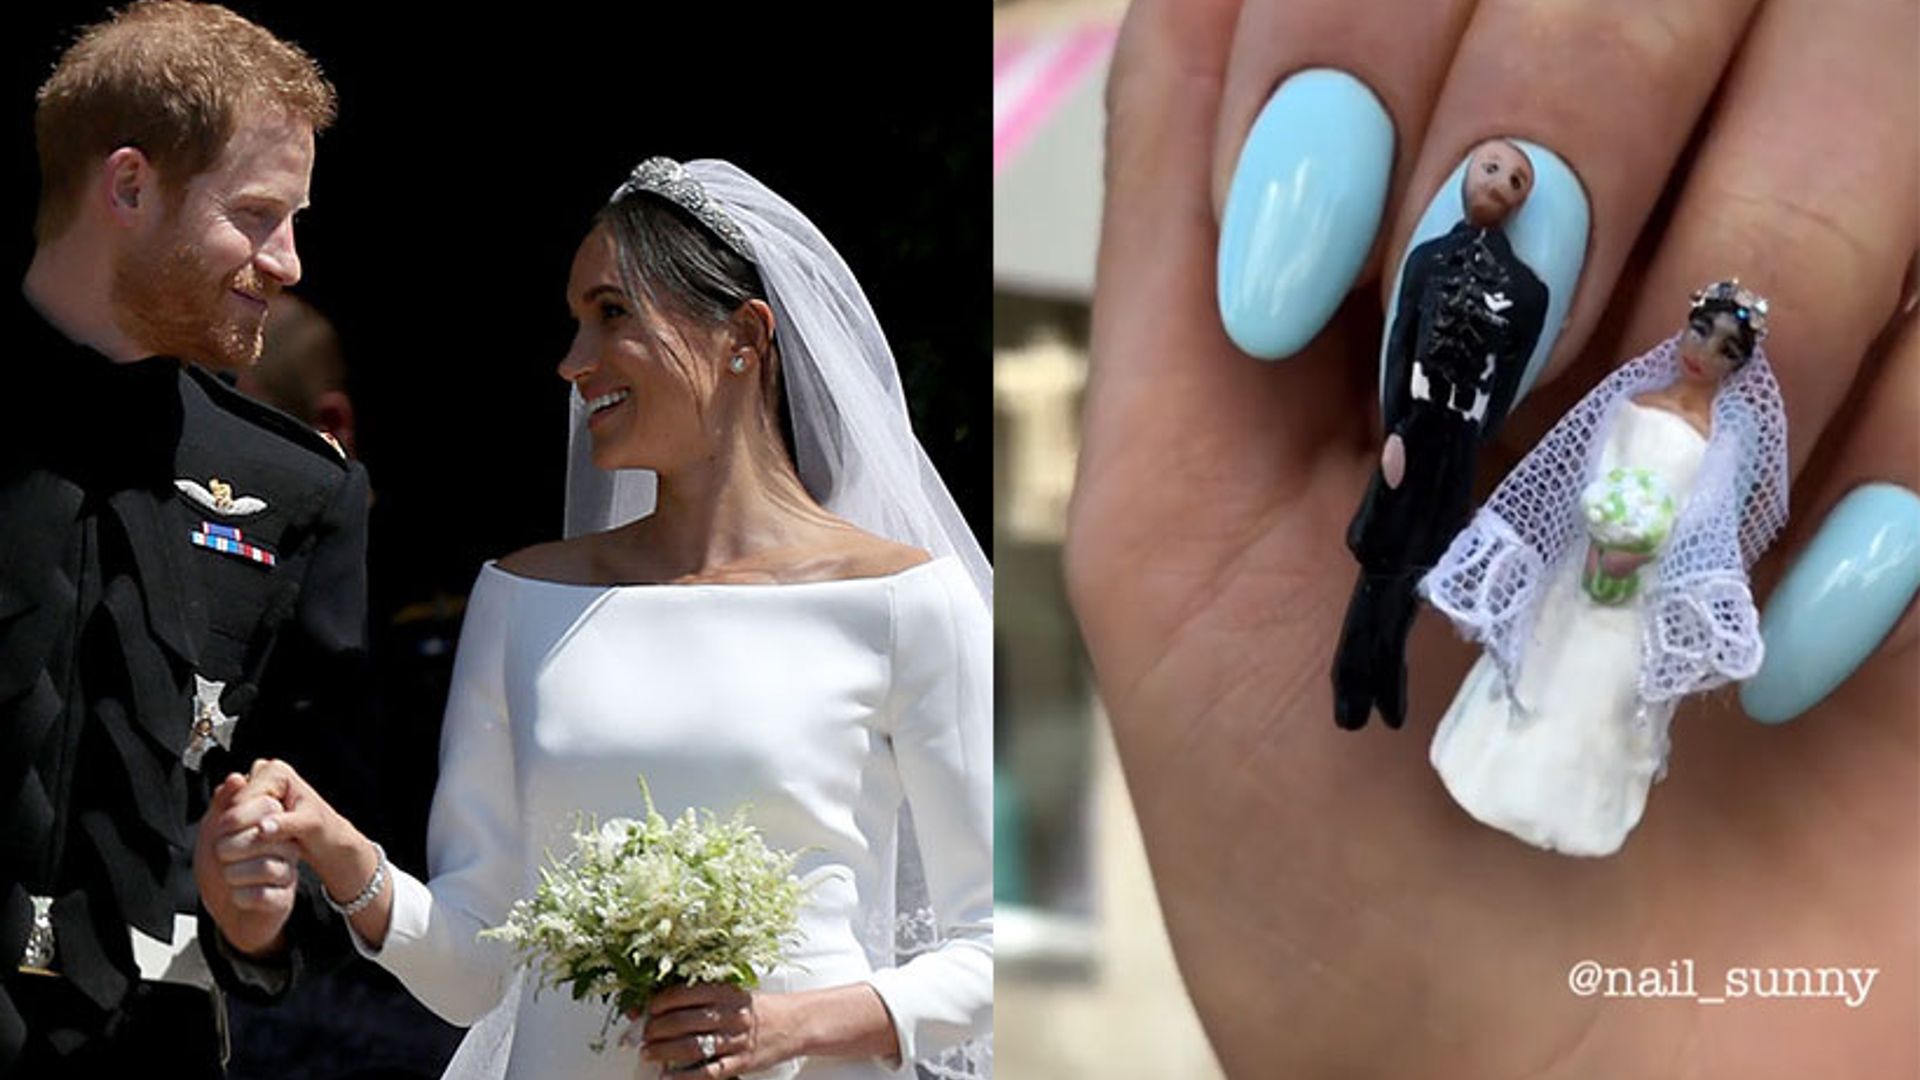 Royal wedding nail art is here… but we're not entirely convinced it will catch on